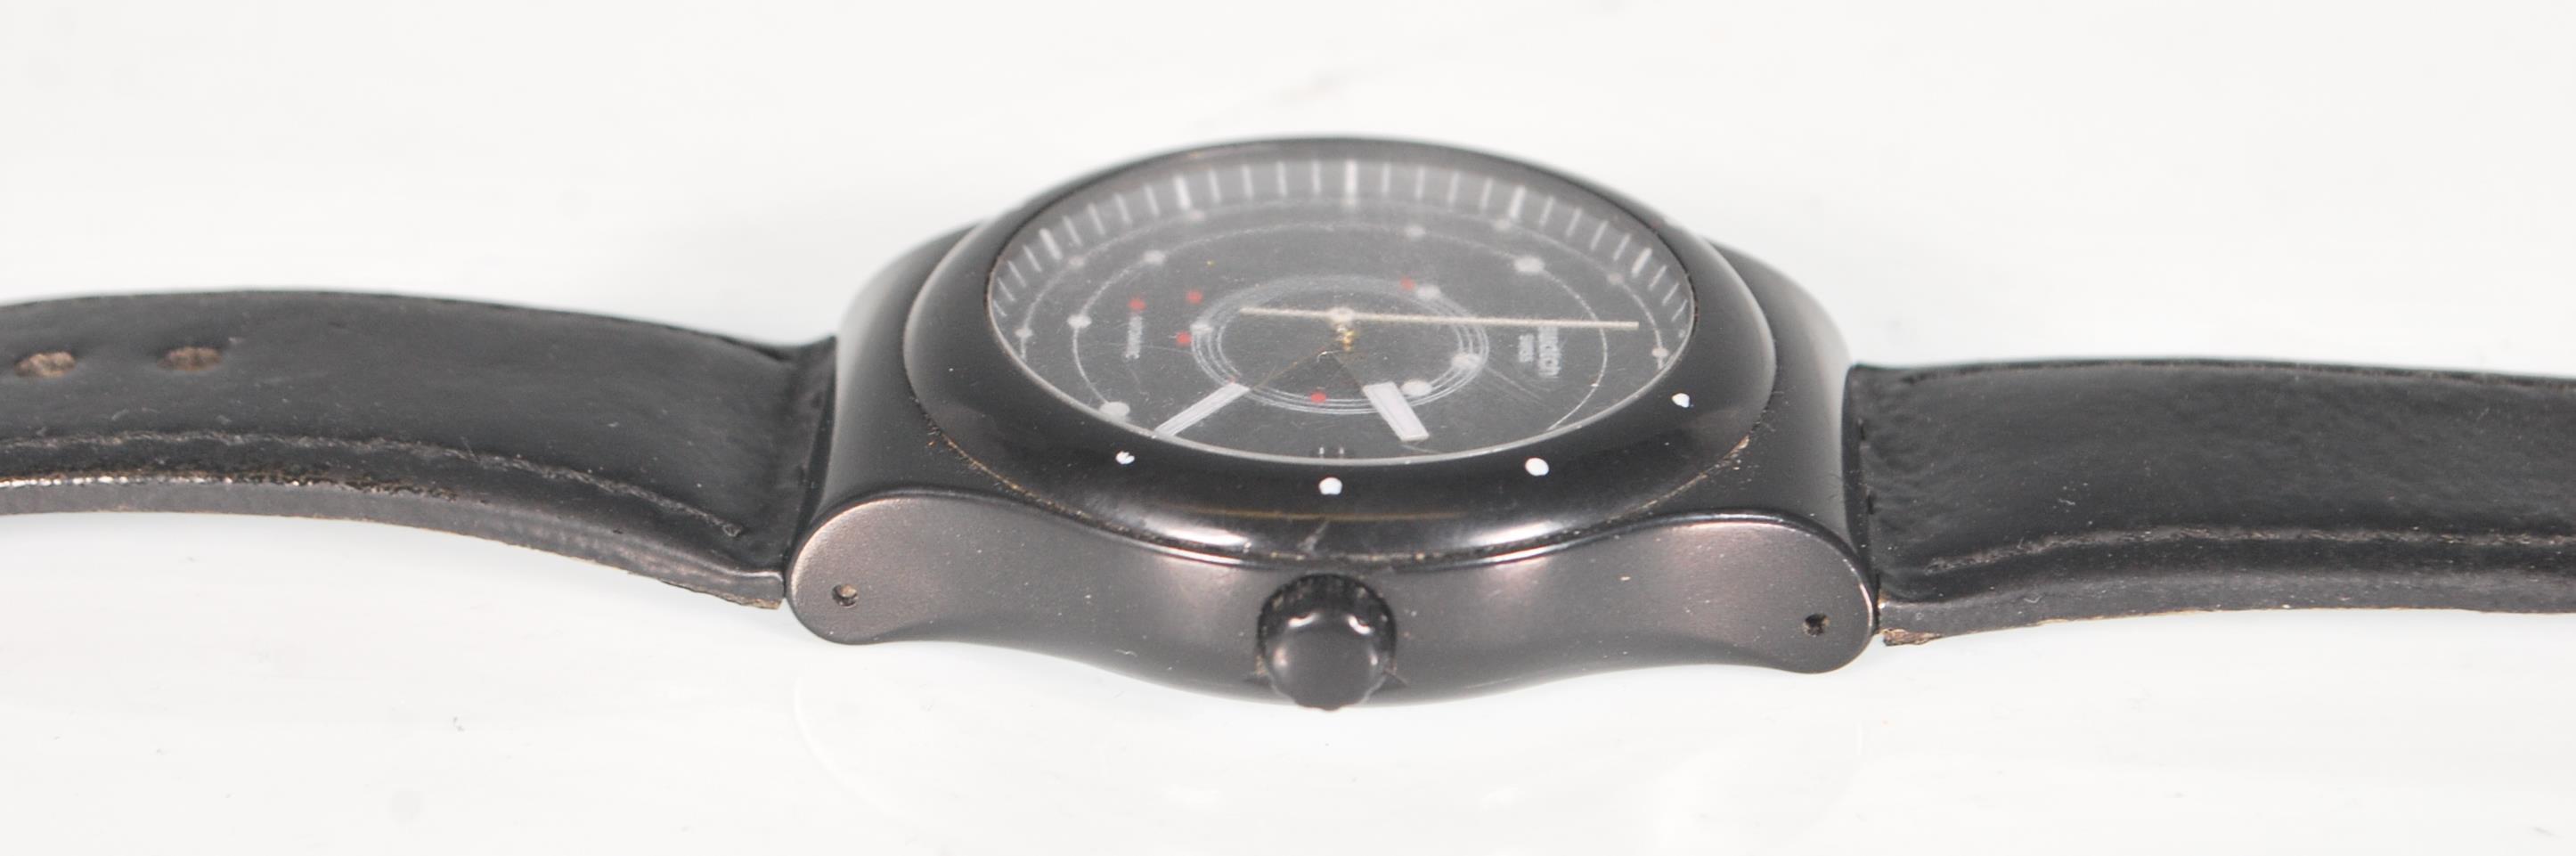 A Swatch Swiss Automatic wrist watch having a black face with a satellite design dial and date - Image 3 of 4